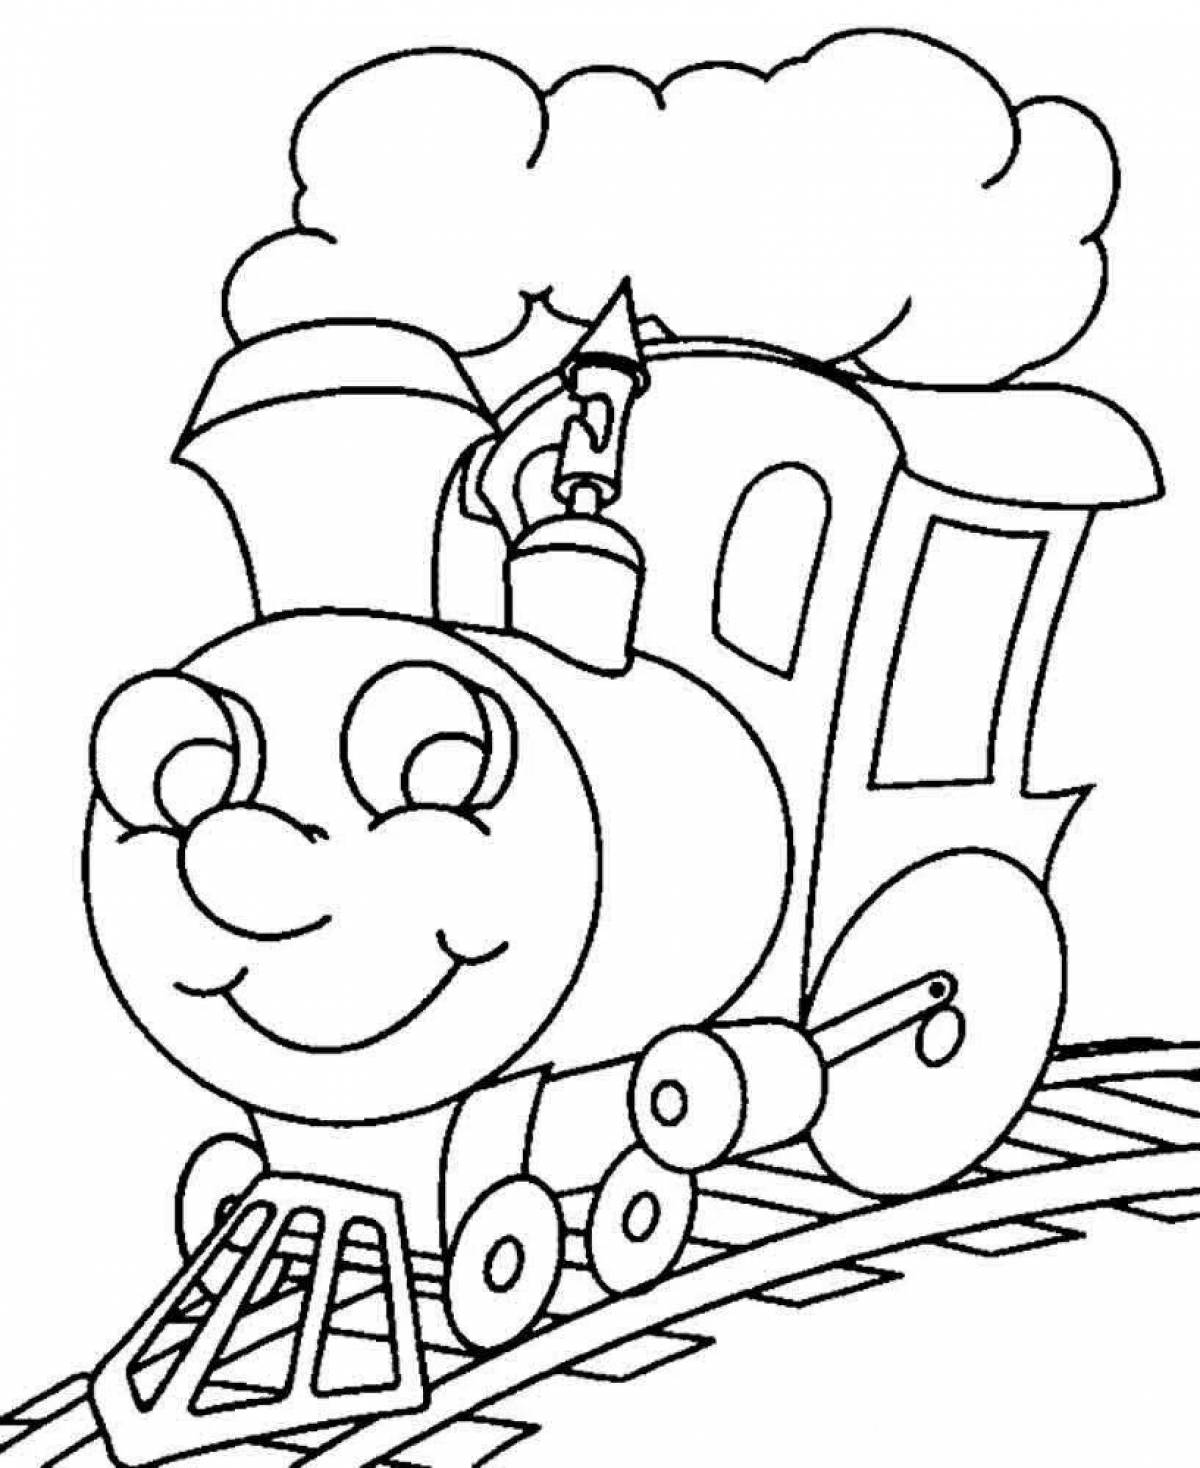 Fancy train coloring book for kids